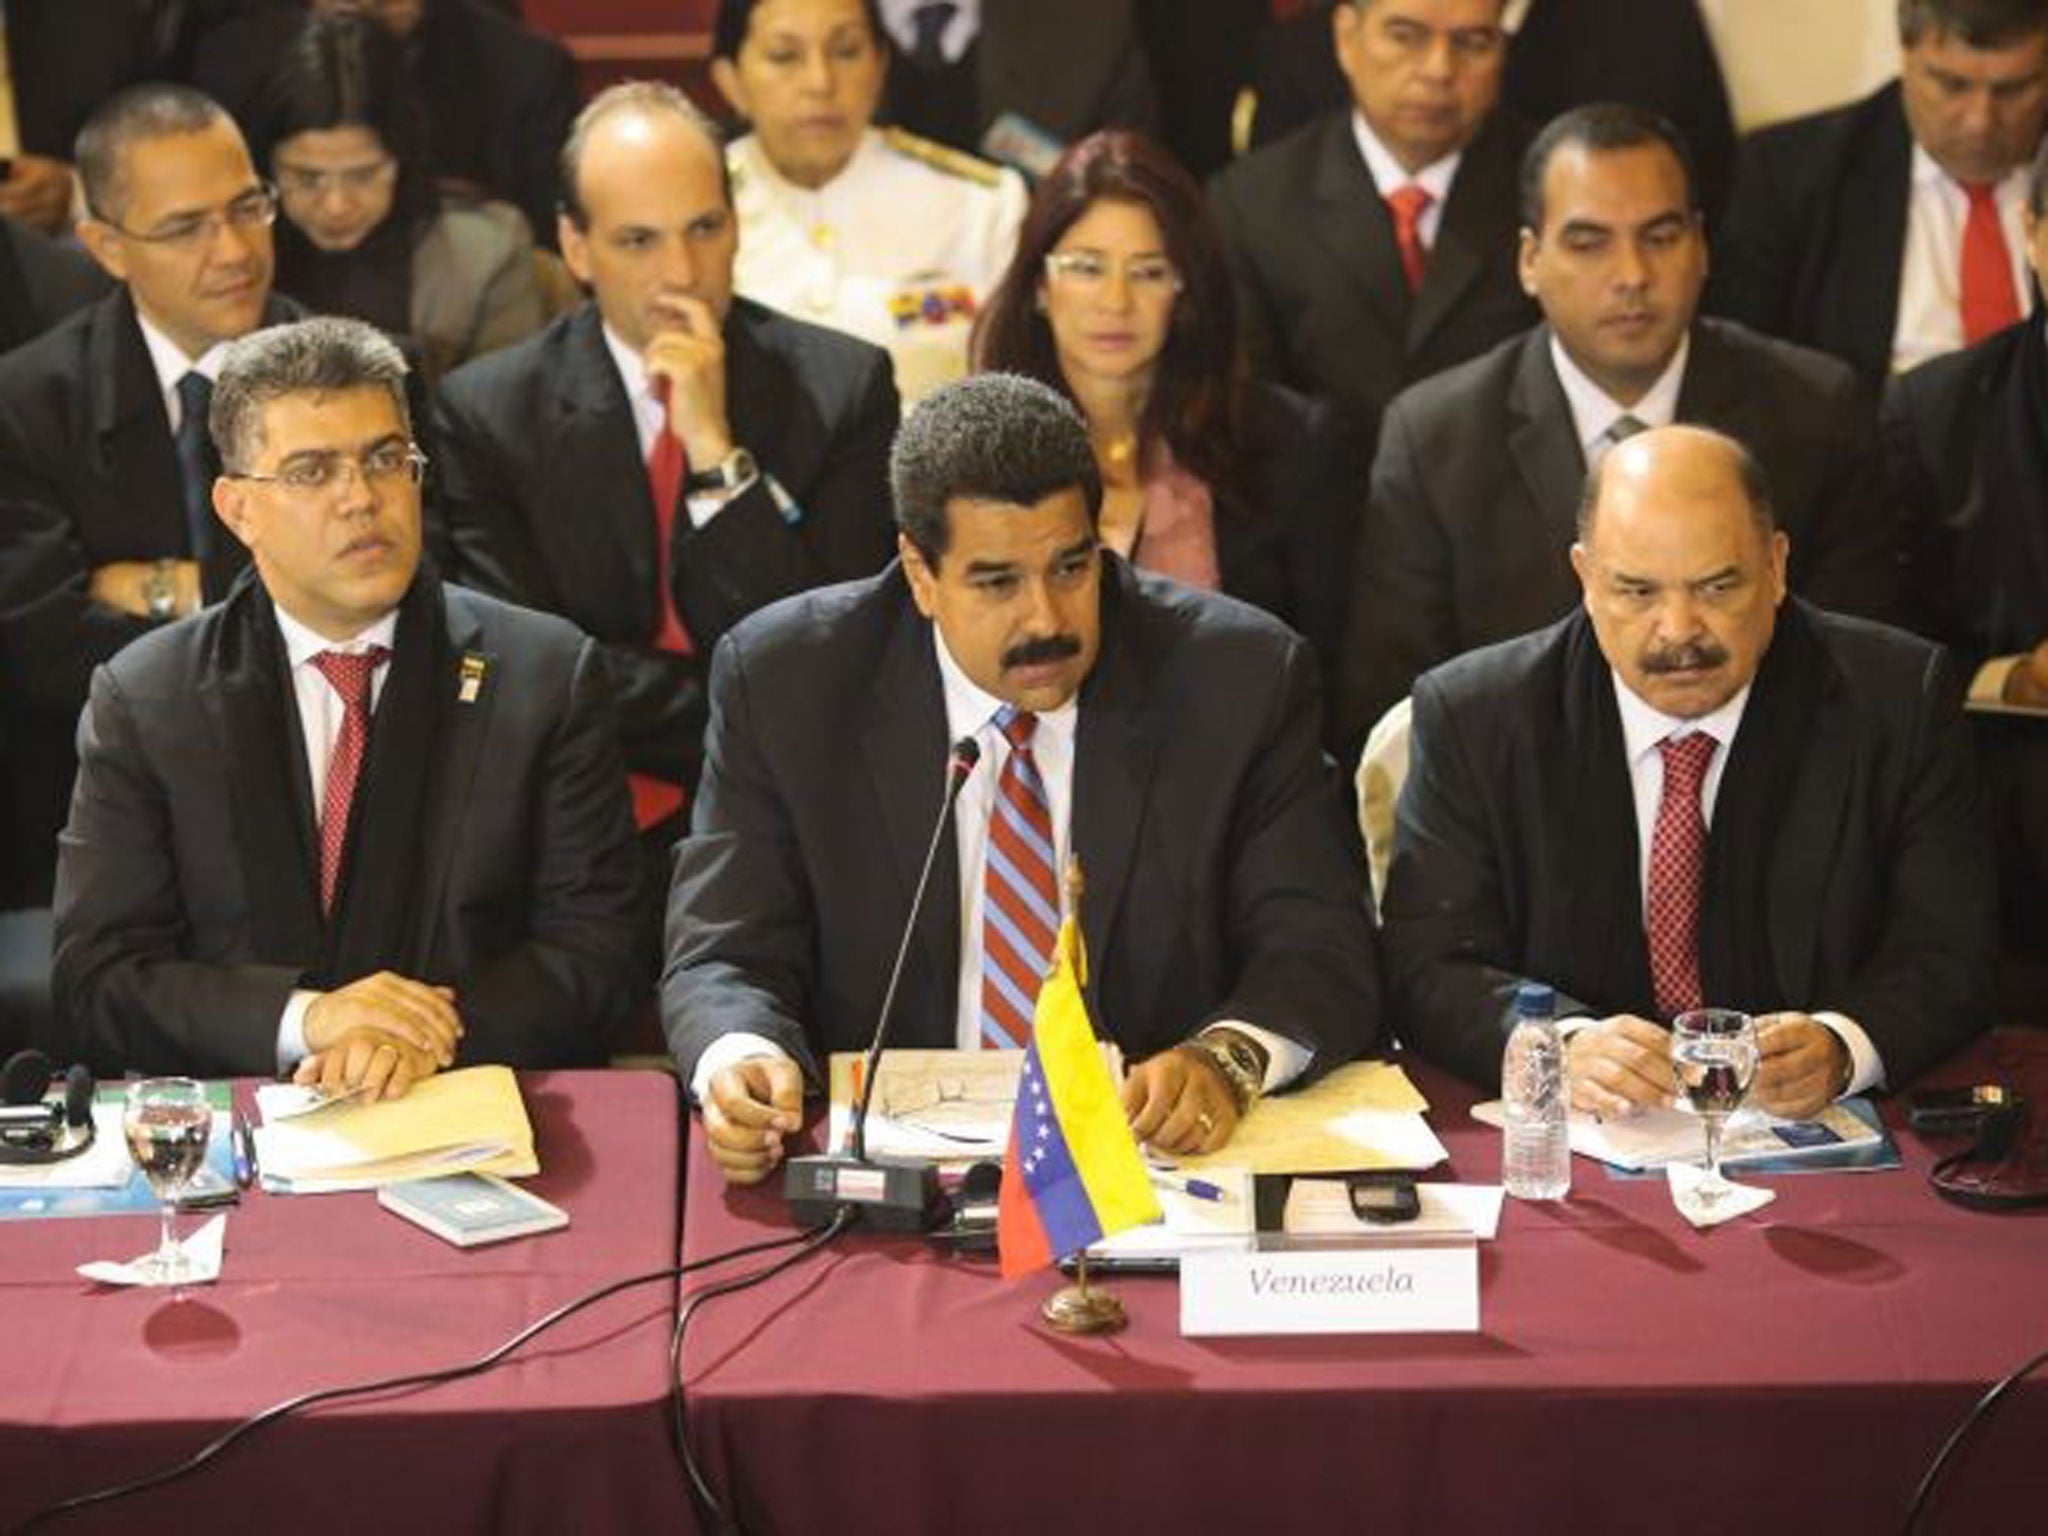 President Maduro's ministry has announced they will no longer work towards repairing diplomatic ties with Washington